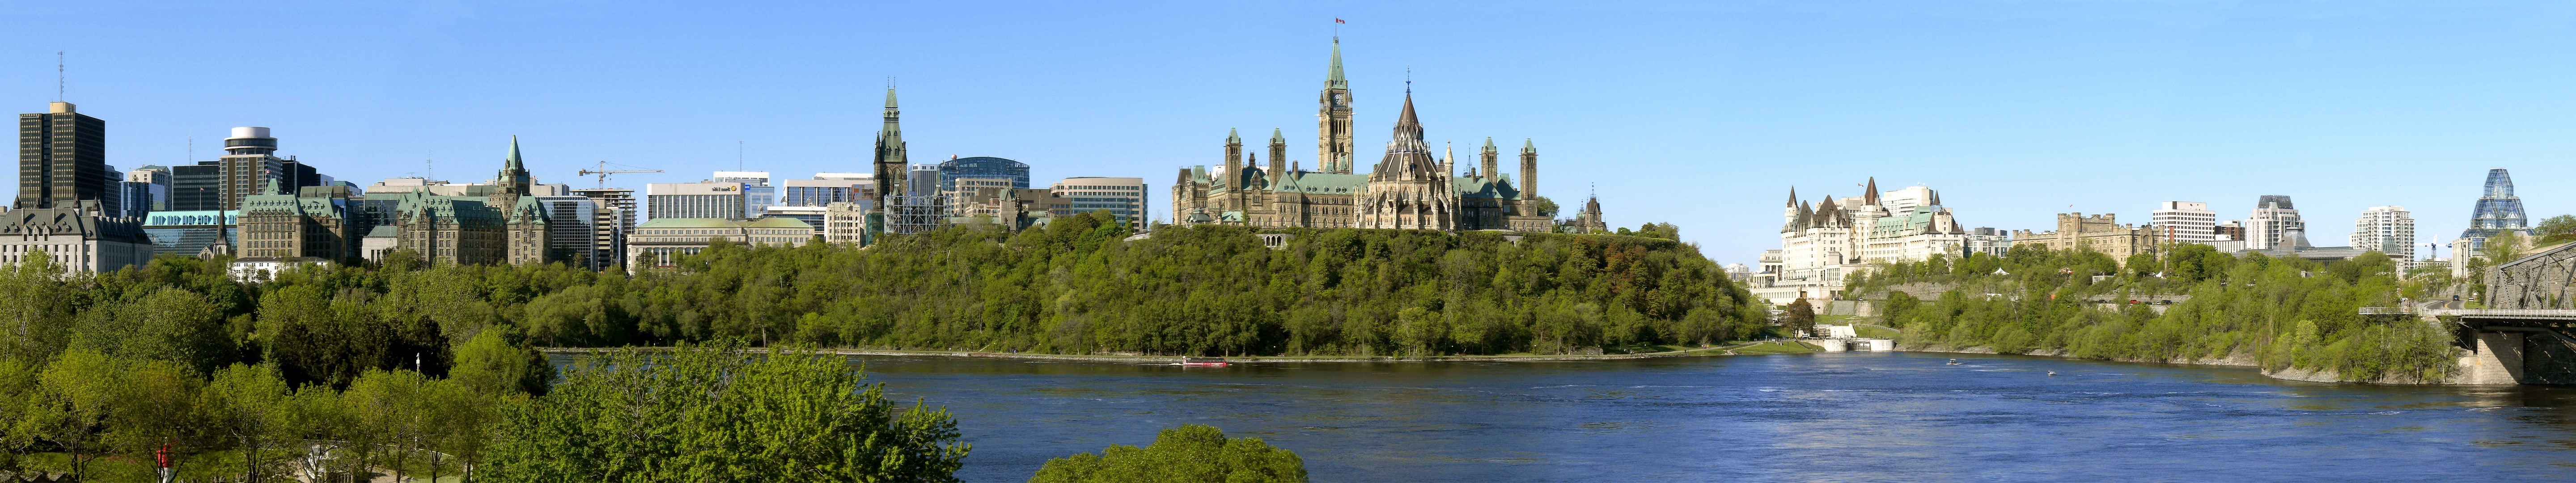 Canada, North America, City, Cathedral, River, Water, Sky, Trees, Ottawa, Panorama, Nature, Landscape Wallpaper